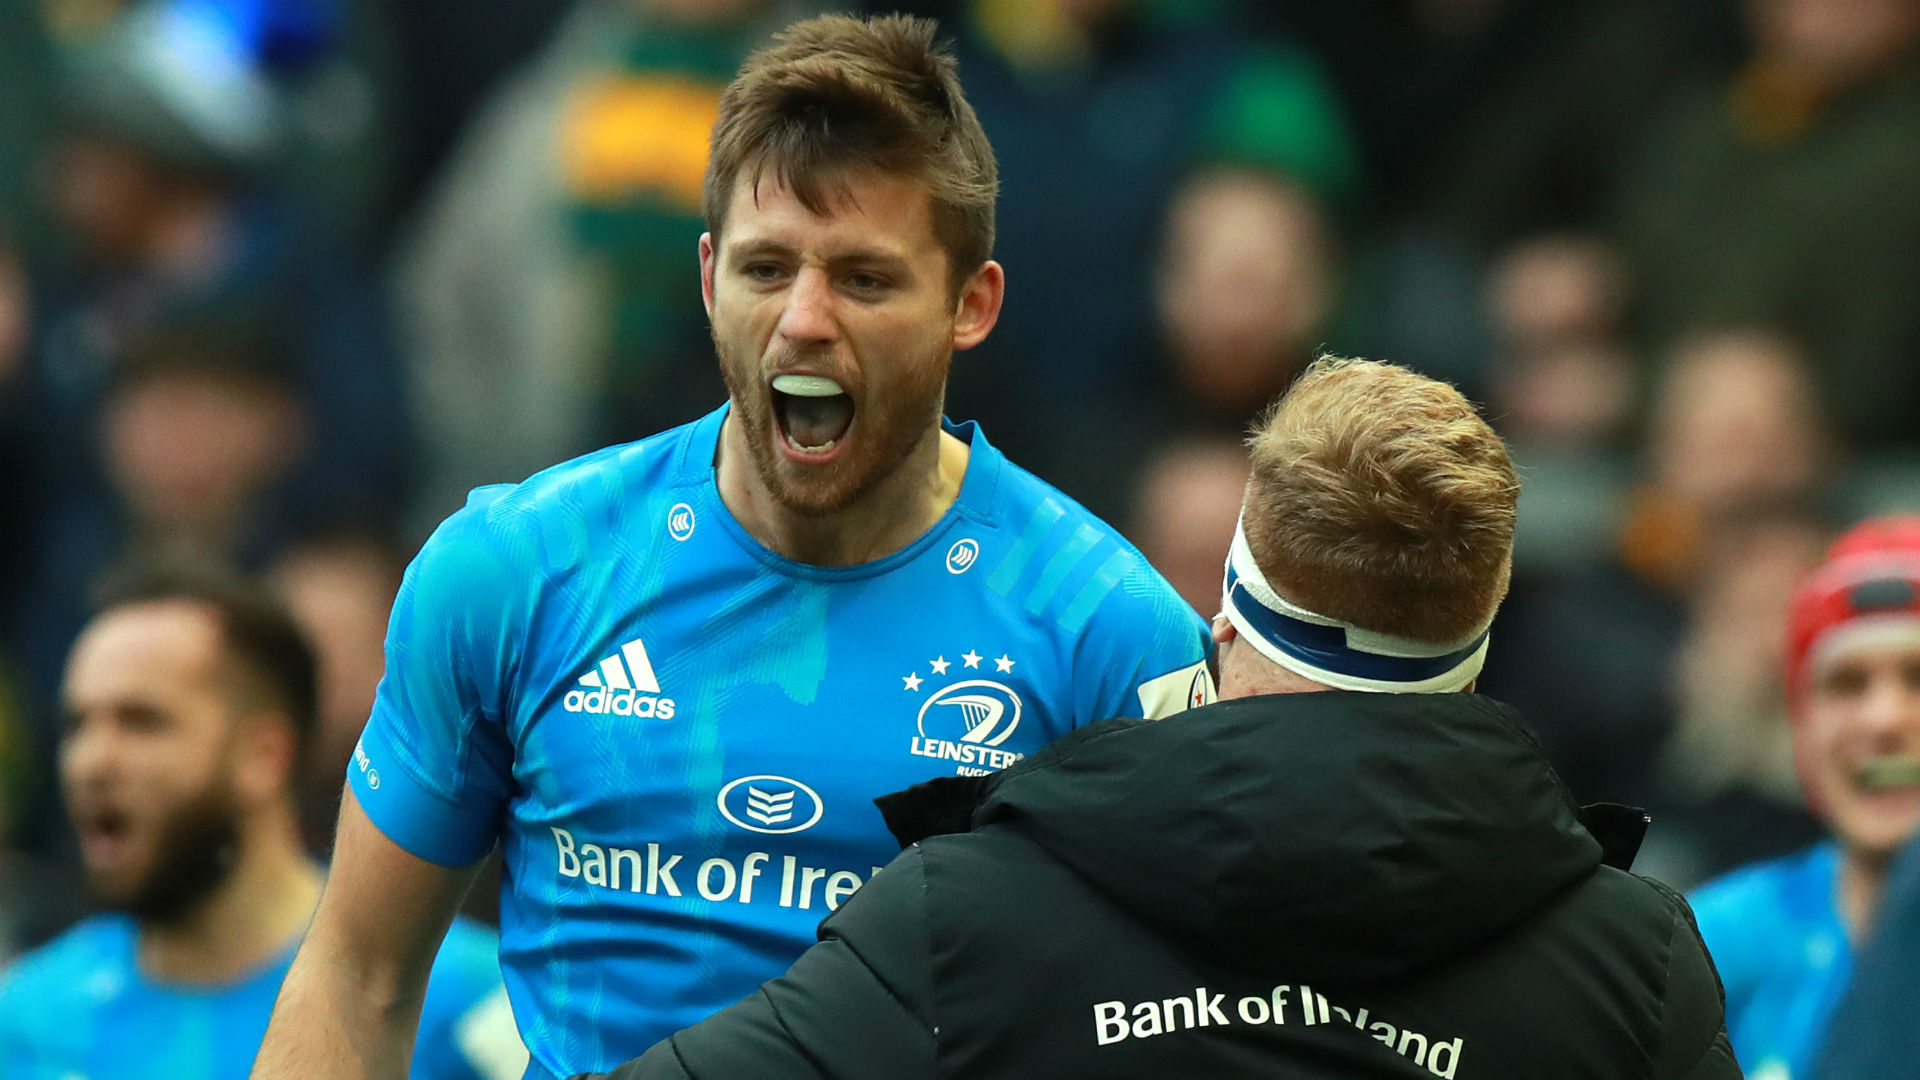 There were seven tries in Leinster's 43-16 European Champions Cup win over Northampton Saints as they made it 10 victories from 10.